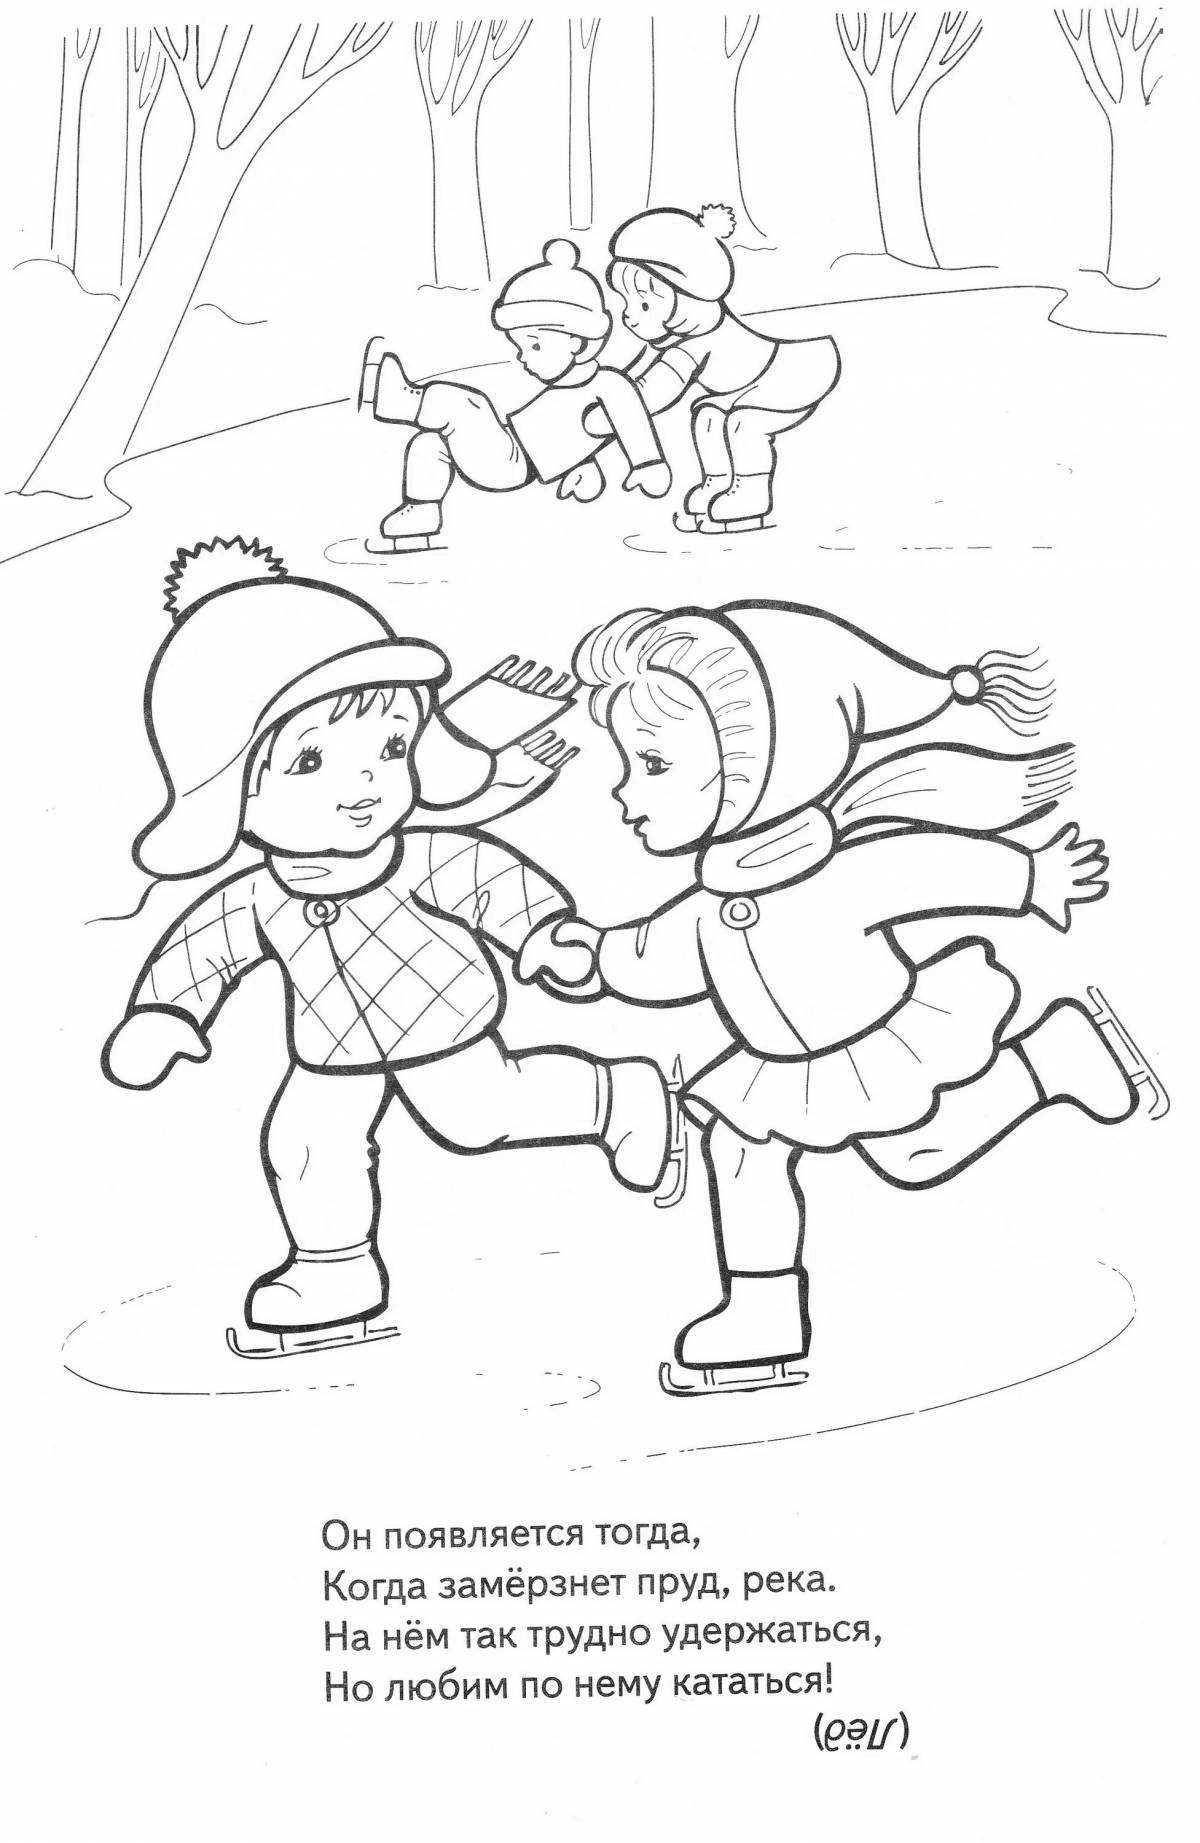 Exciting winter safety rules coloring book